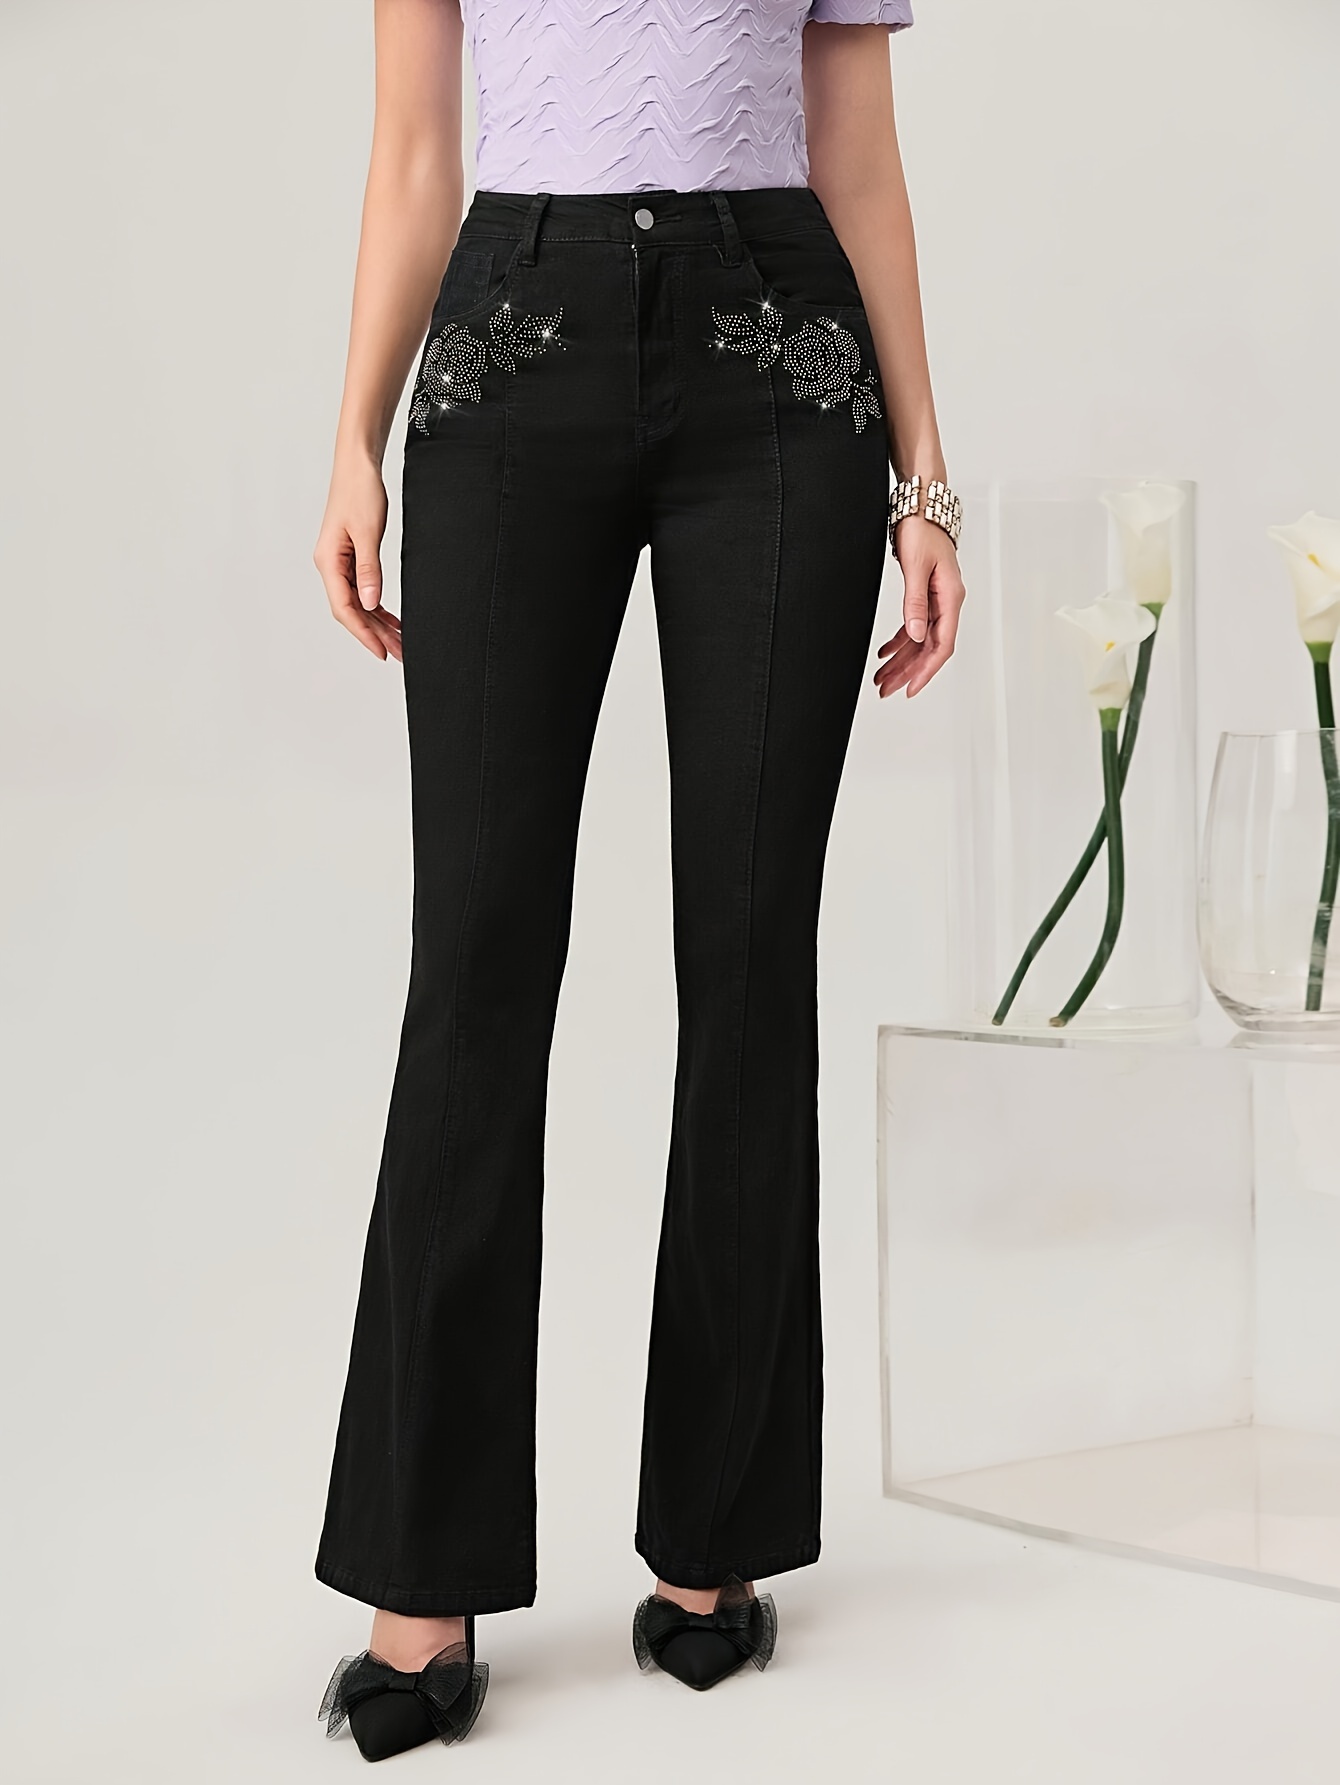 Woman Rhinestone Jeans Embroidered High Waisted Bootcut Jeans Size